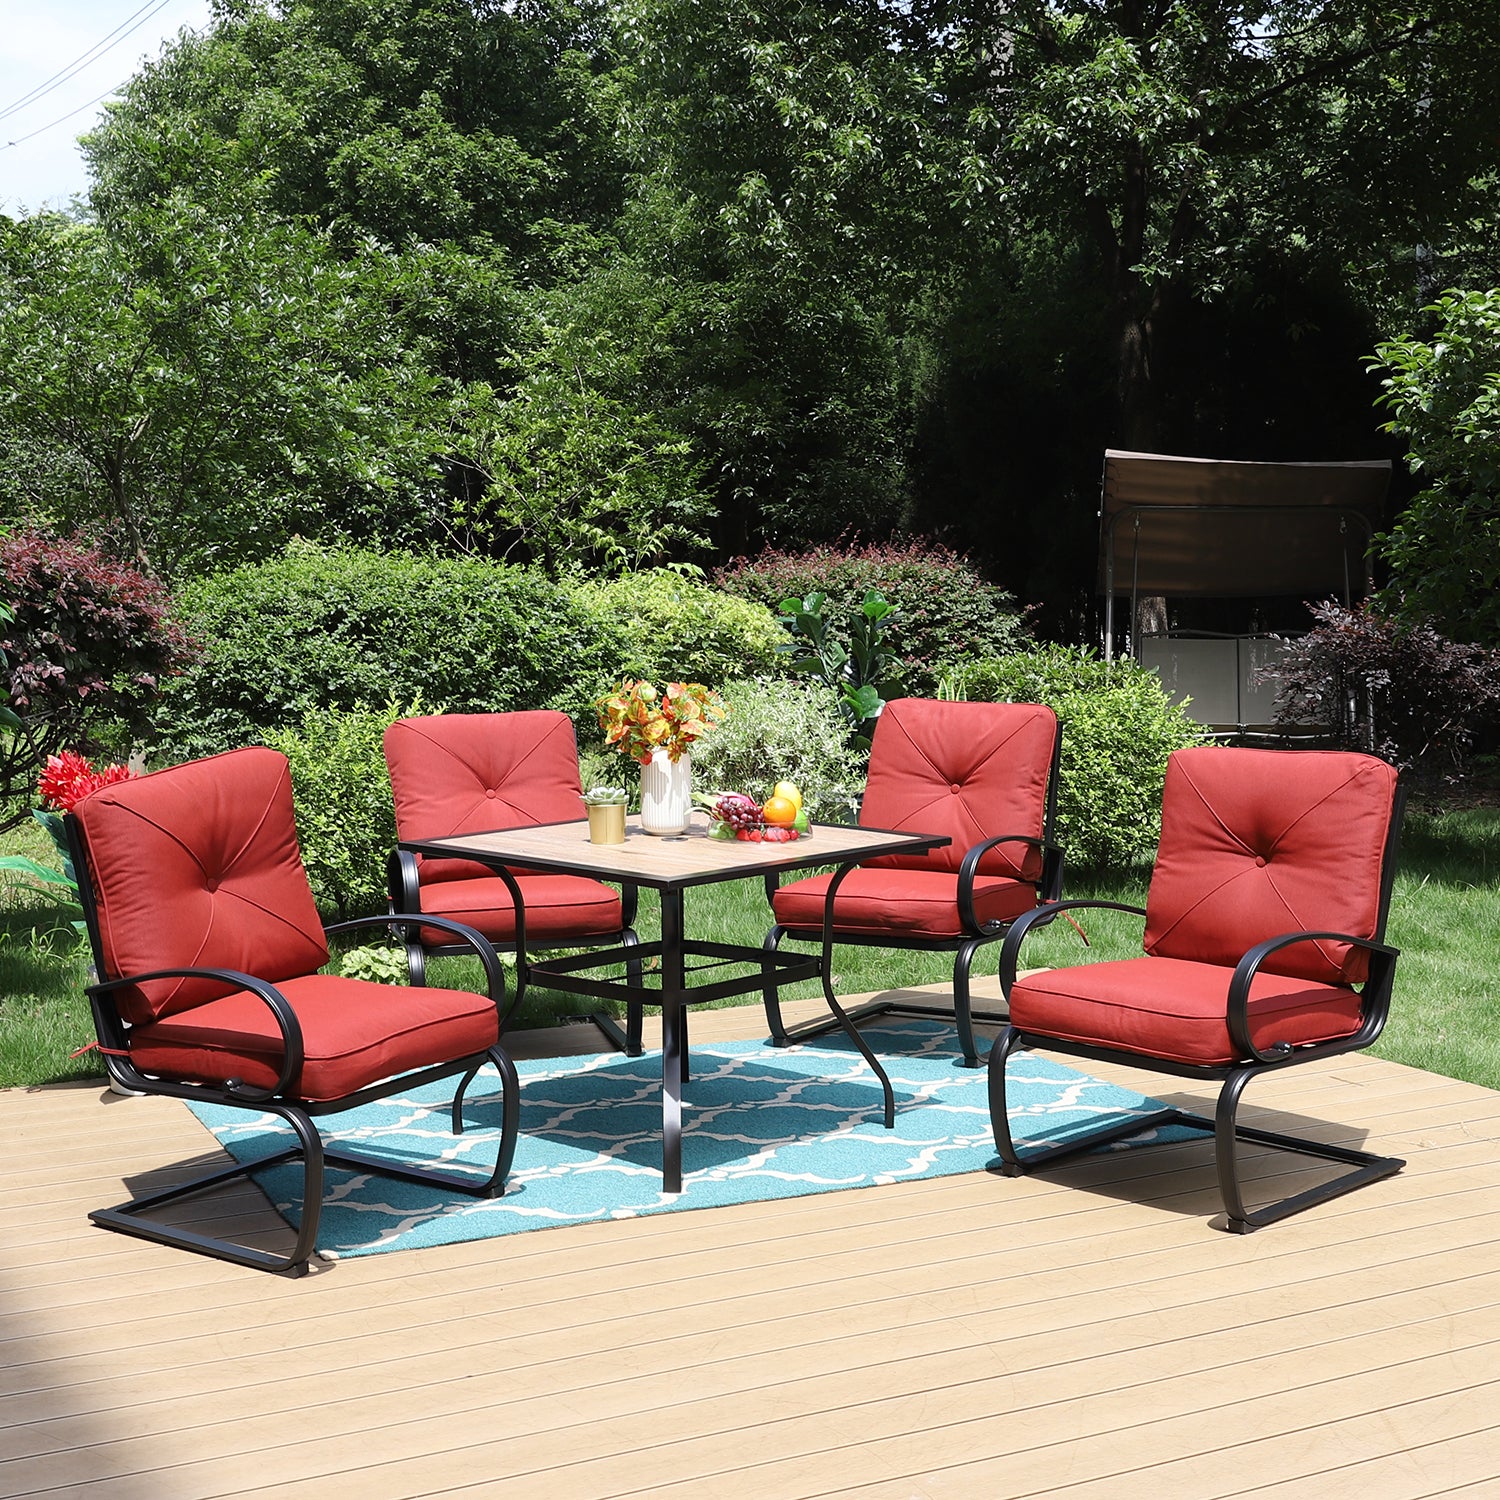 Sophia & William Wood-look Square Table & C-Spring Cushioned Chairs 5-Piece Outdoor Dining Set